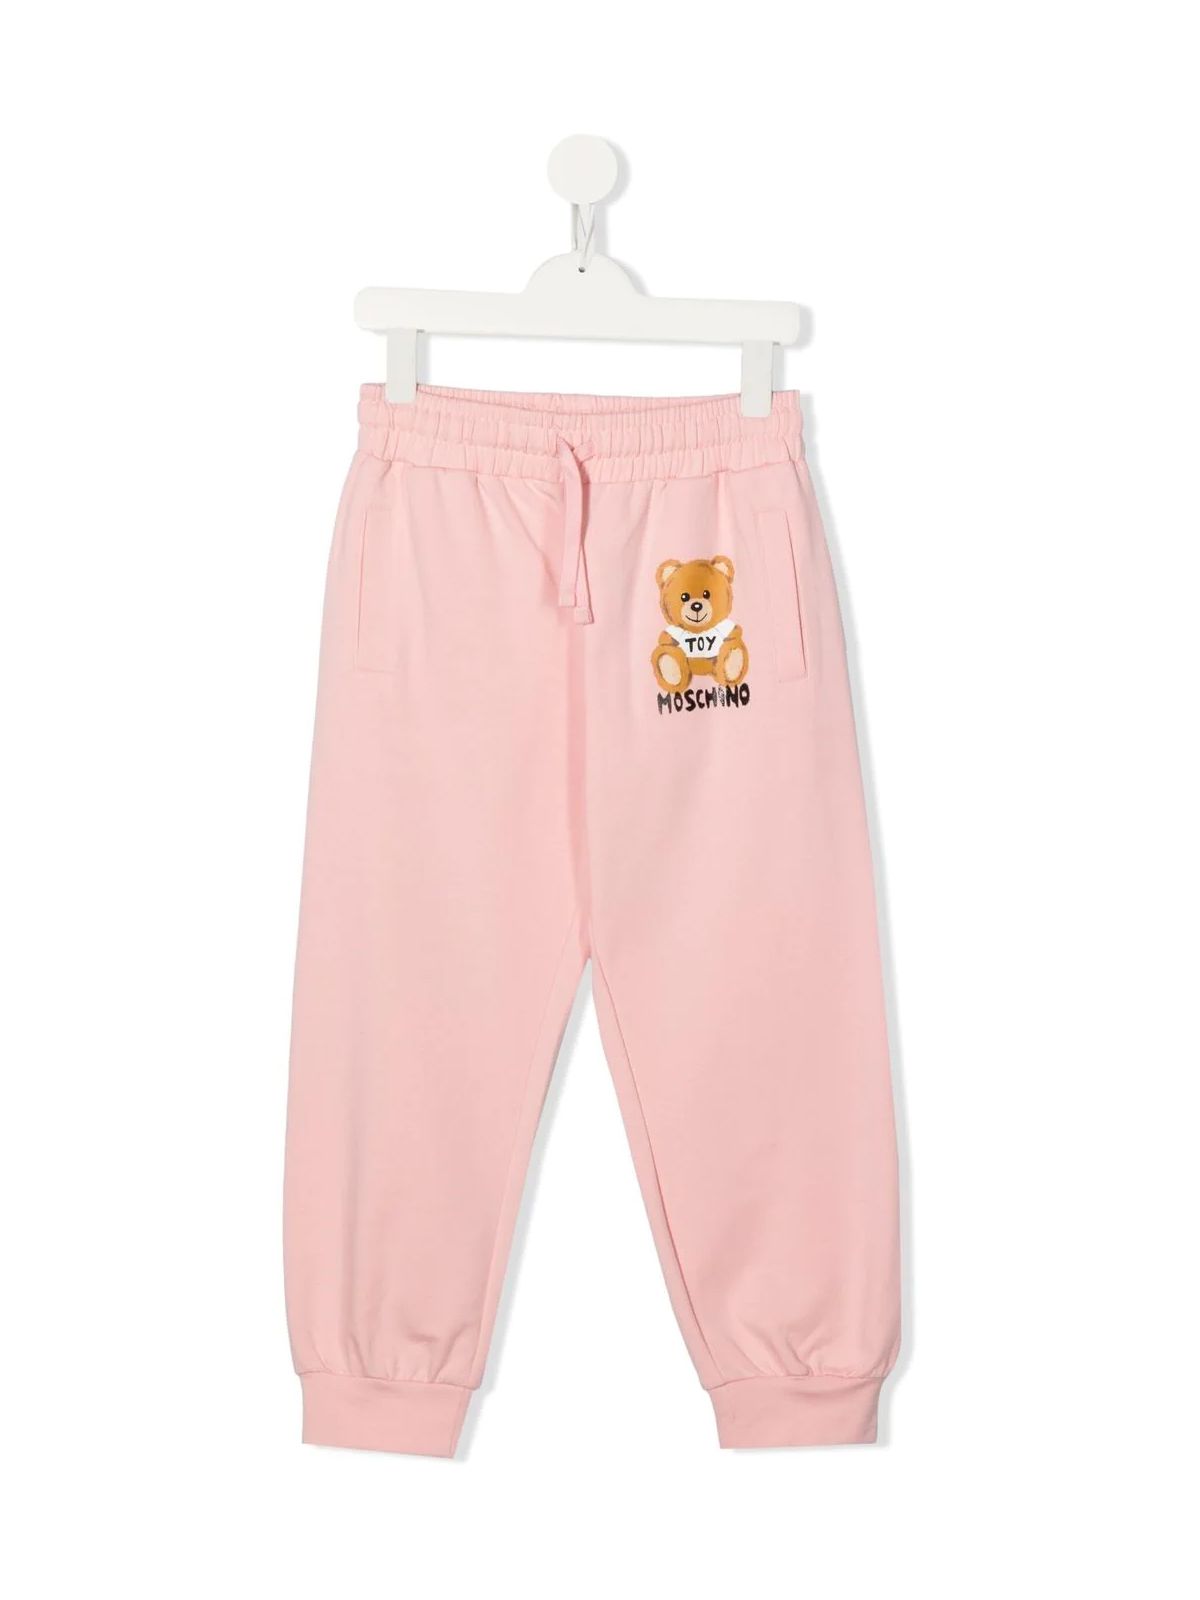 Moschino Teen Sweatpants With Small Teddy Bear Print On One Front Pocket